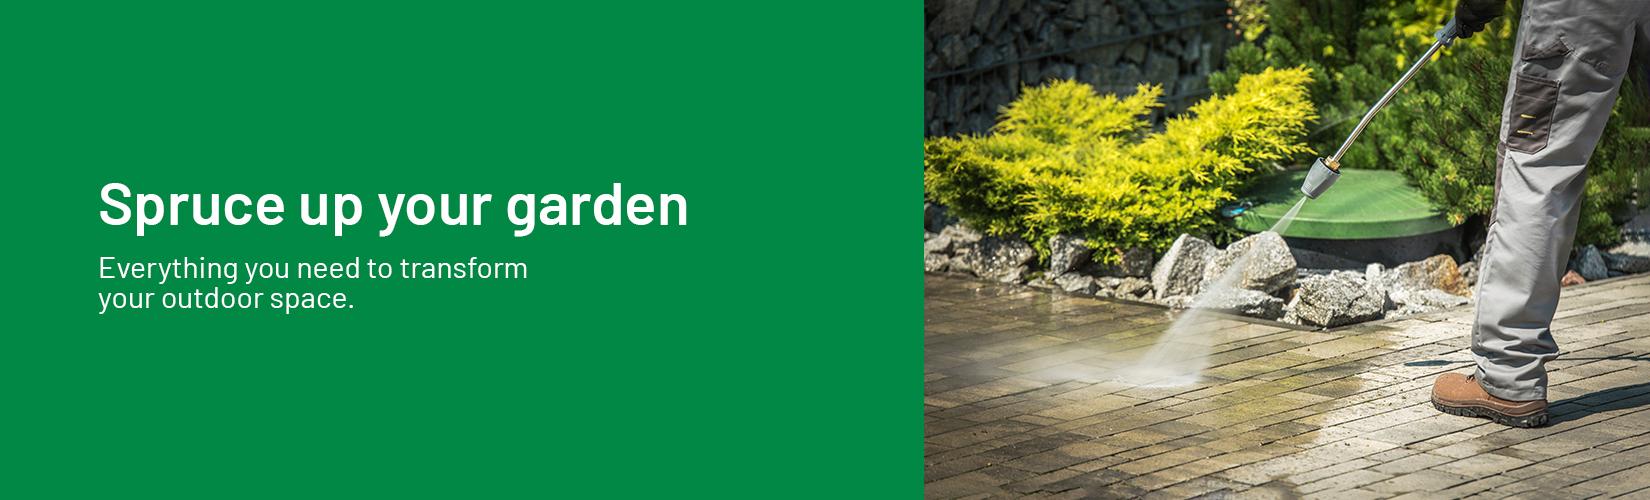 Spruce up your garden. Everything you need to transform your outdoor space.